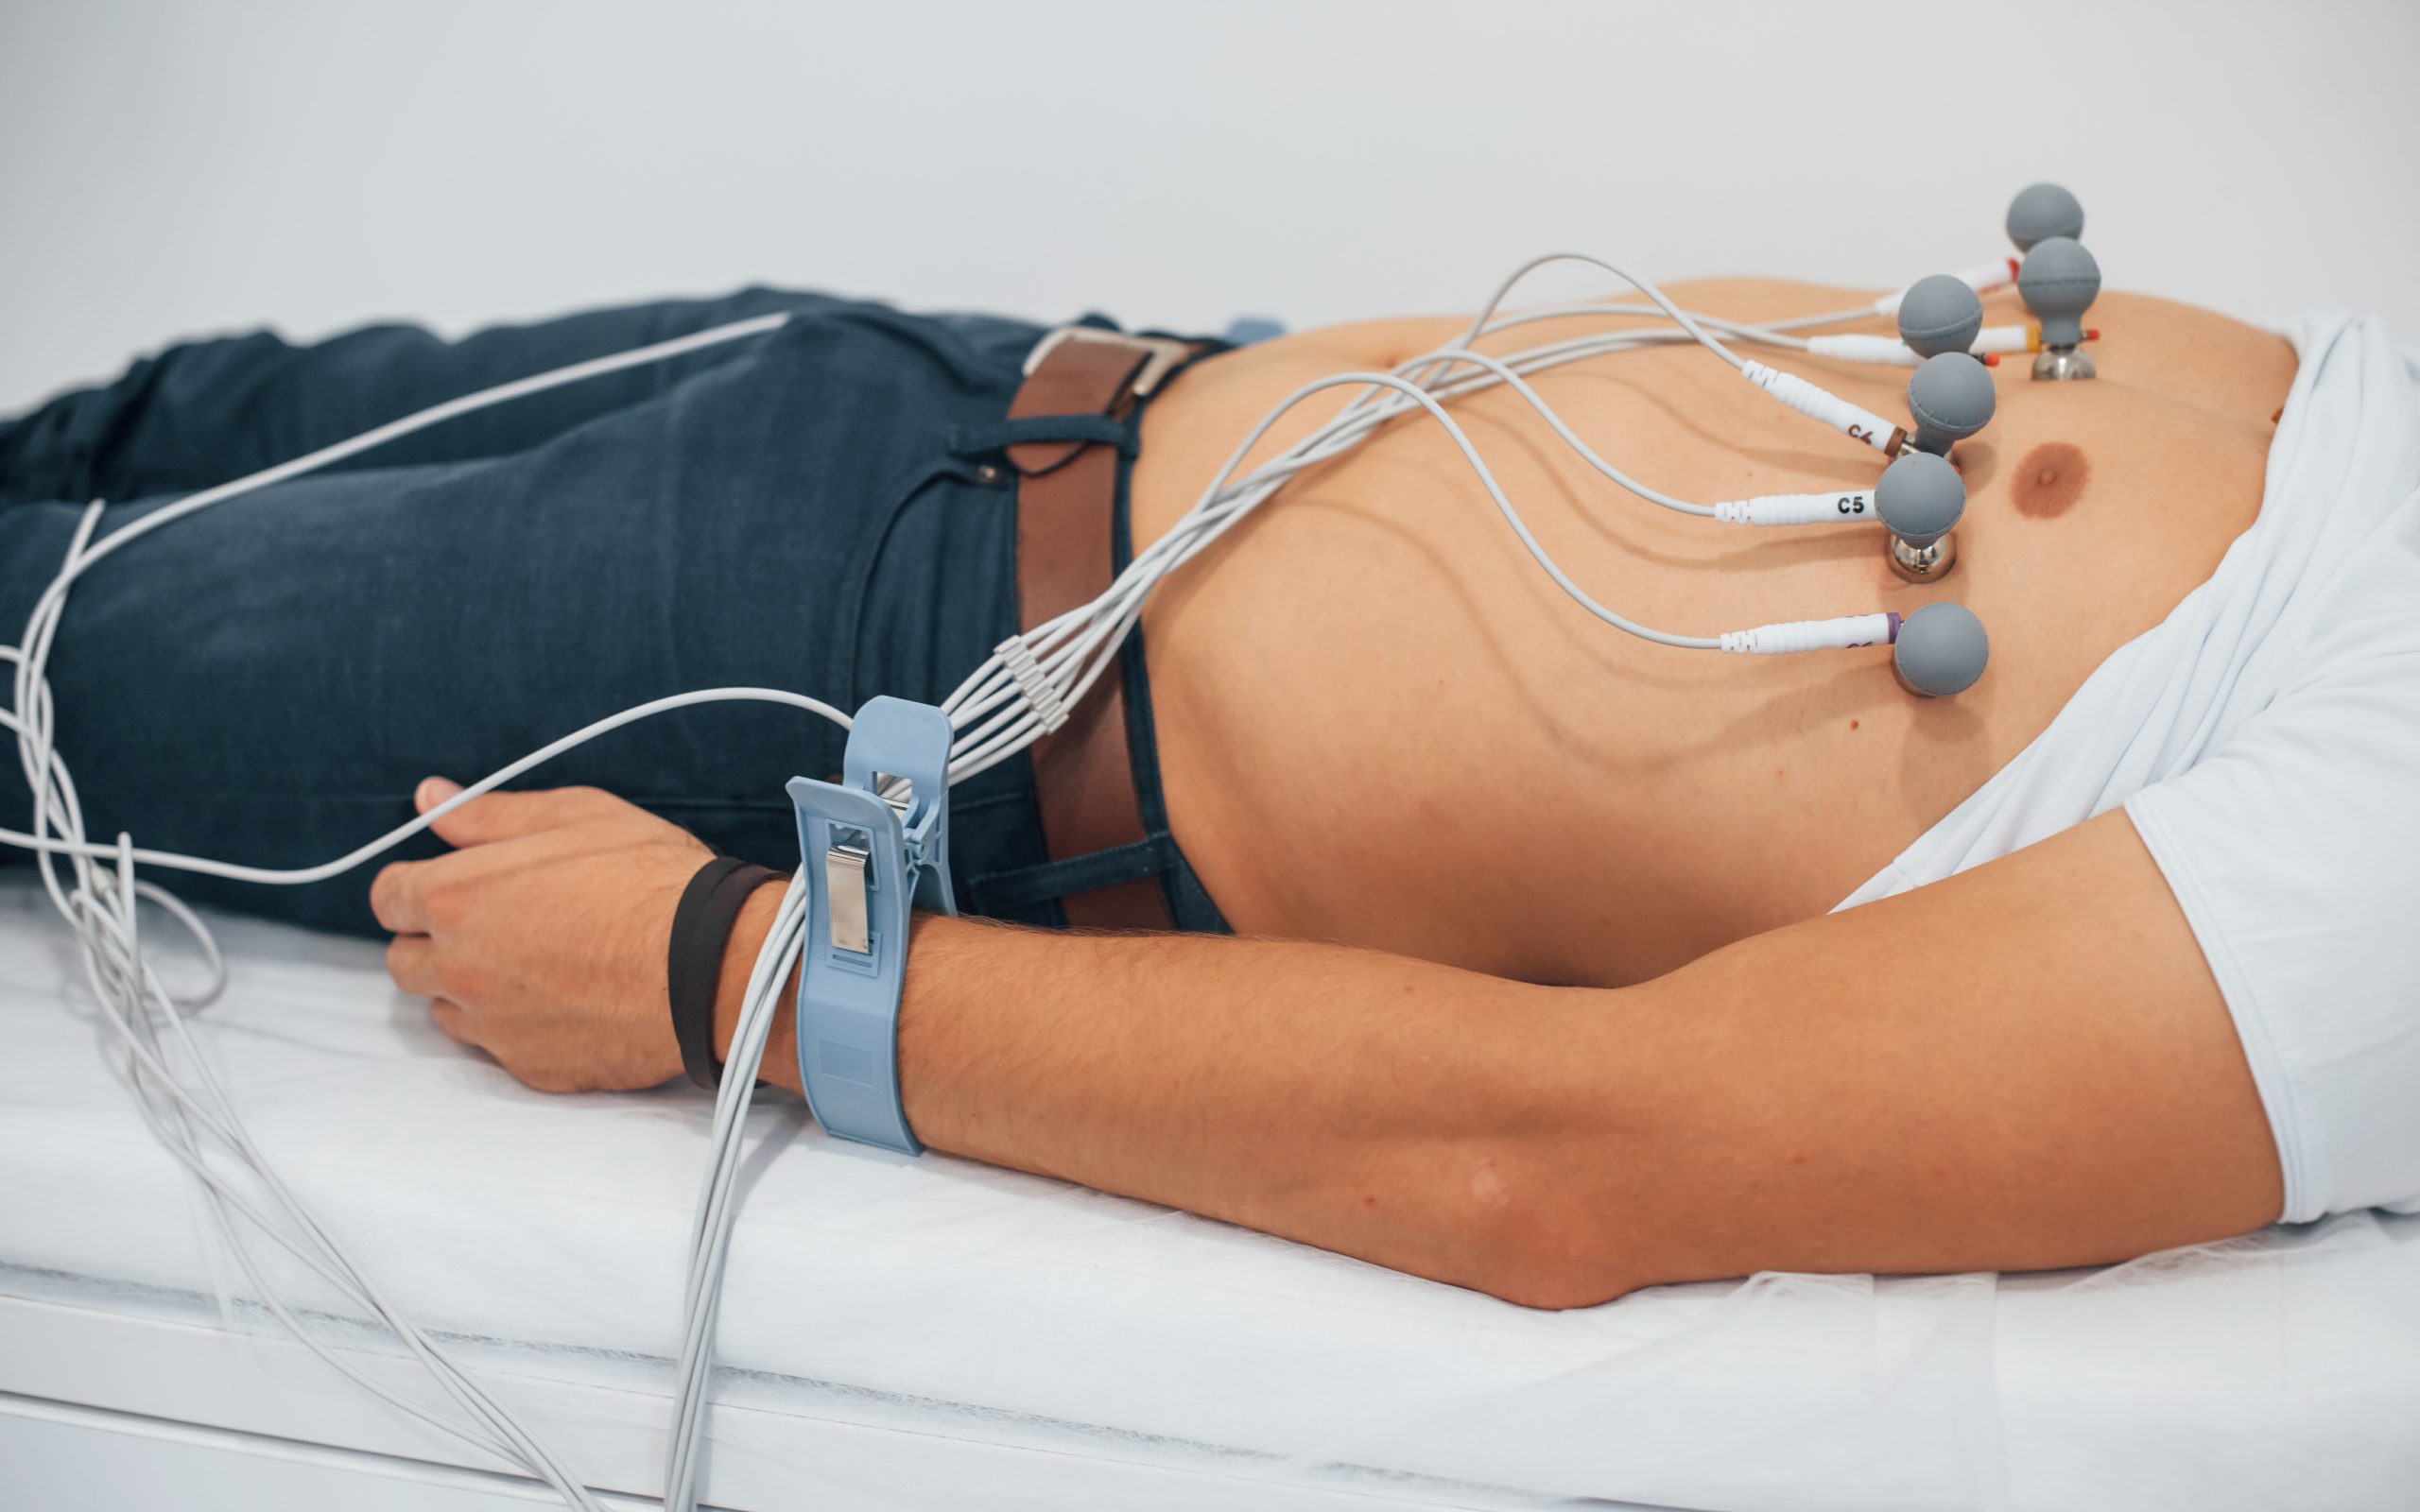 Man lying on the bed in the clinic and getting electrocardiogram test.